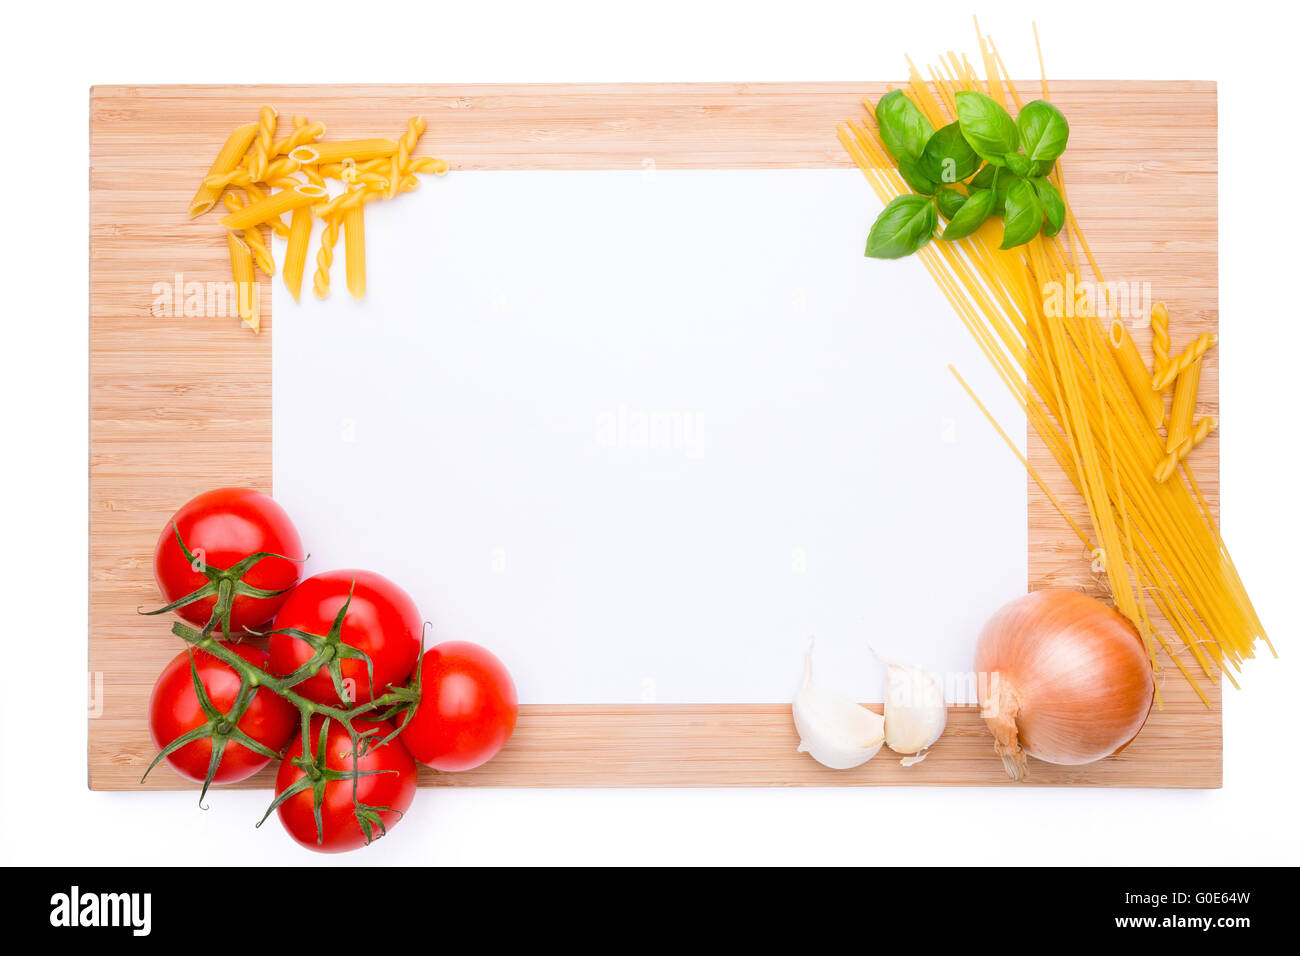 Wooden cutting board with knife and vegetables on Stock Photo